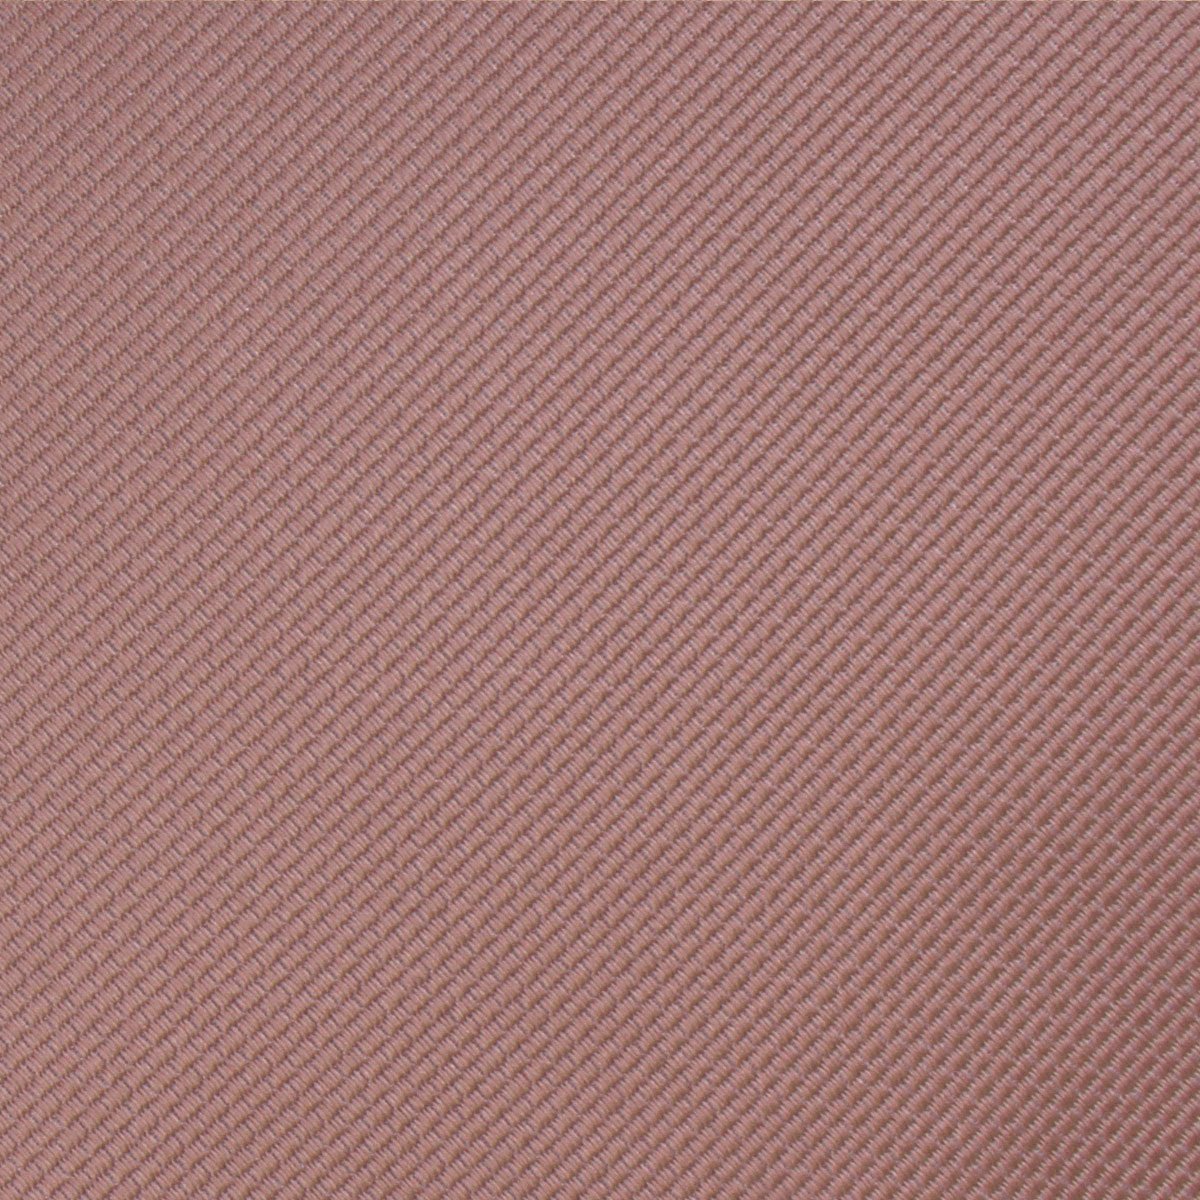 Antique Dusty Rose Weave Pocket Square Fabric